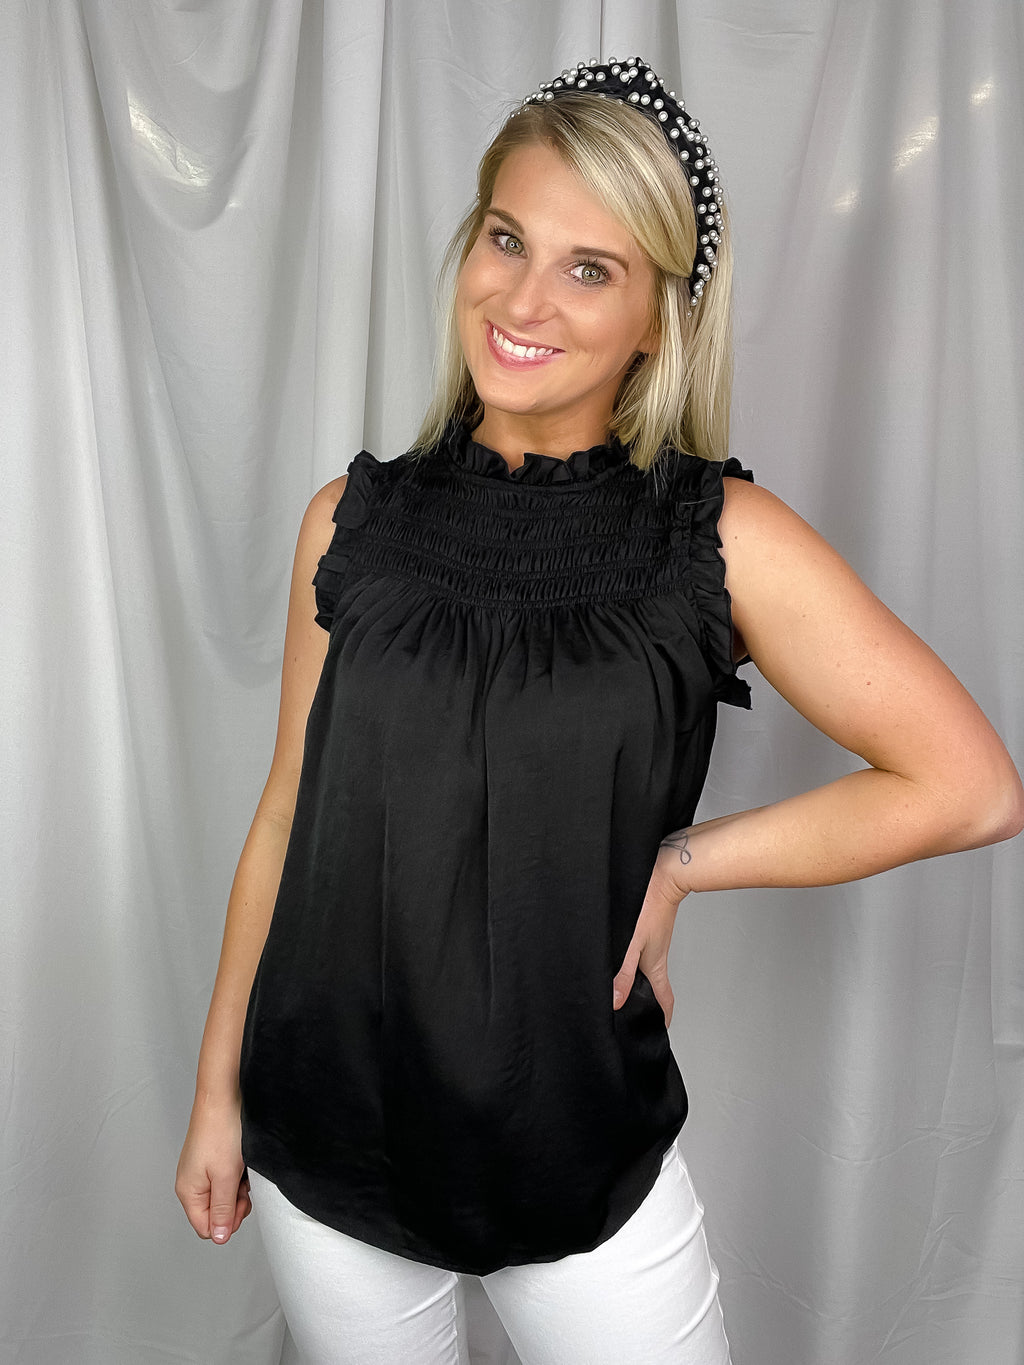 Top features a solid base color, sleeveless detail, smocked detail, ruffle detailing and runs true to size!-black